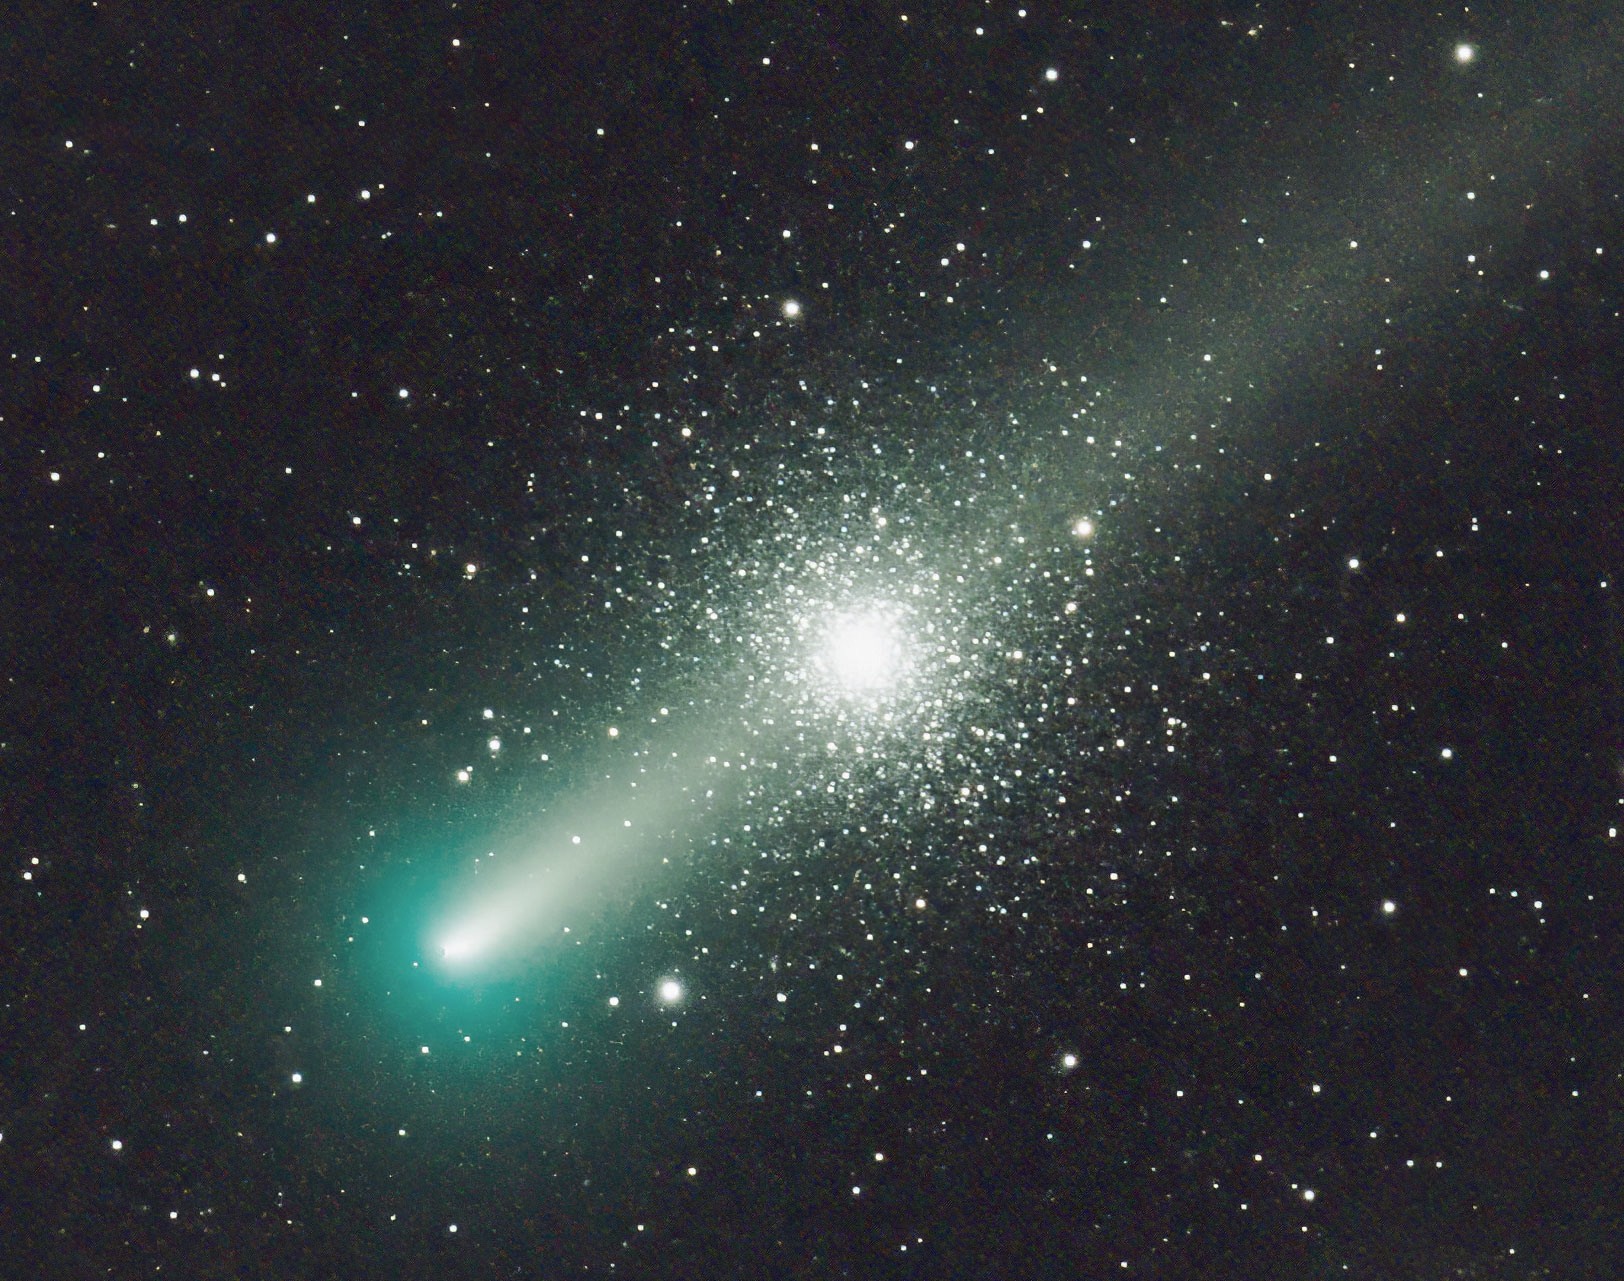 The bright nucleus of the greenish comet is at lower left, with the diffuse tail stretching from there to the top-right corner. The dense star cluster appears centrally, behind the tail; a symmetrical sphere of countless stars.